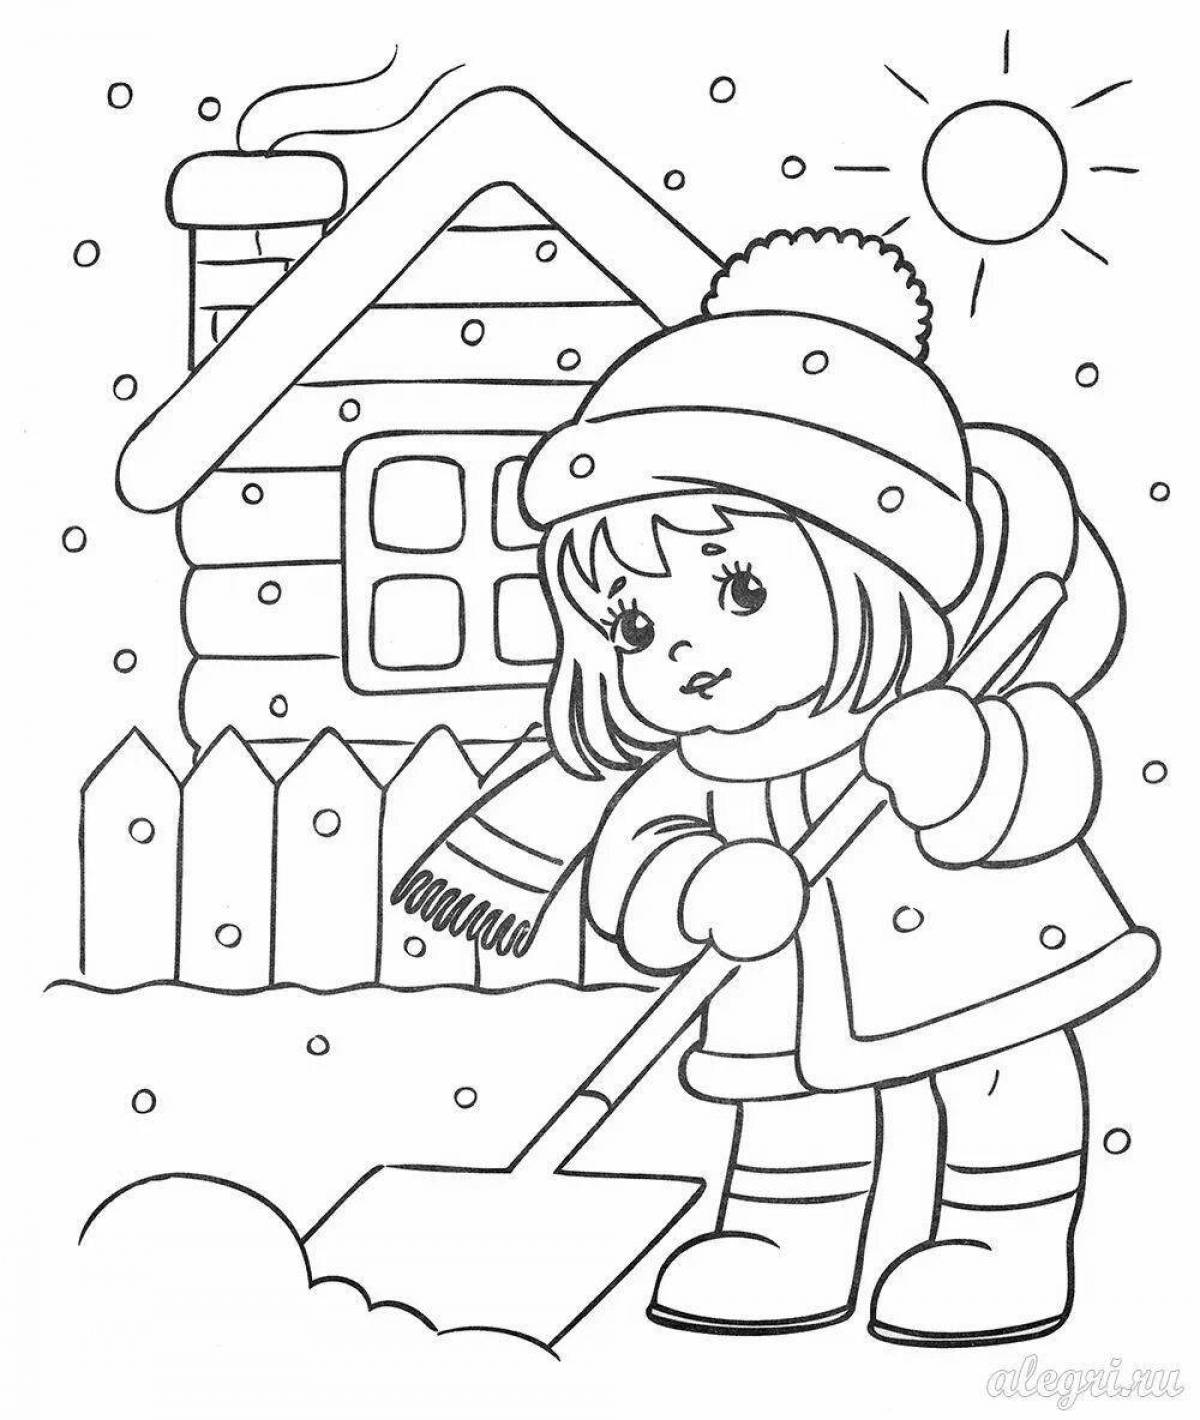 Coloring book 5 years of winter by a lucky chance